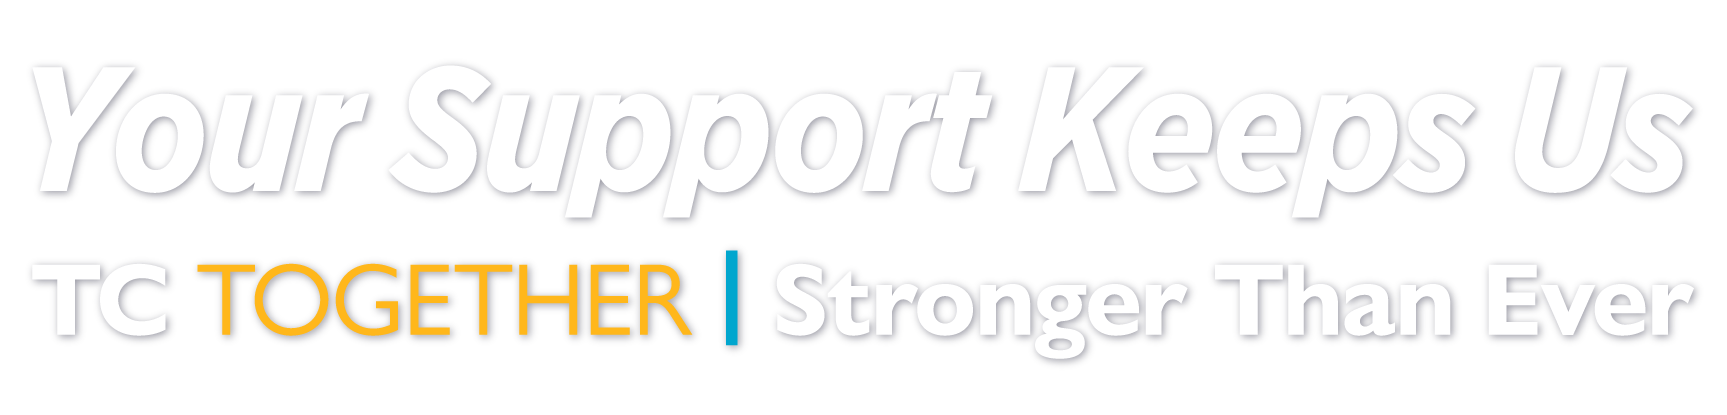 Your Support Keeps Us - TC Together: Stronger Than Ever